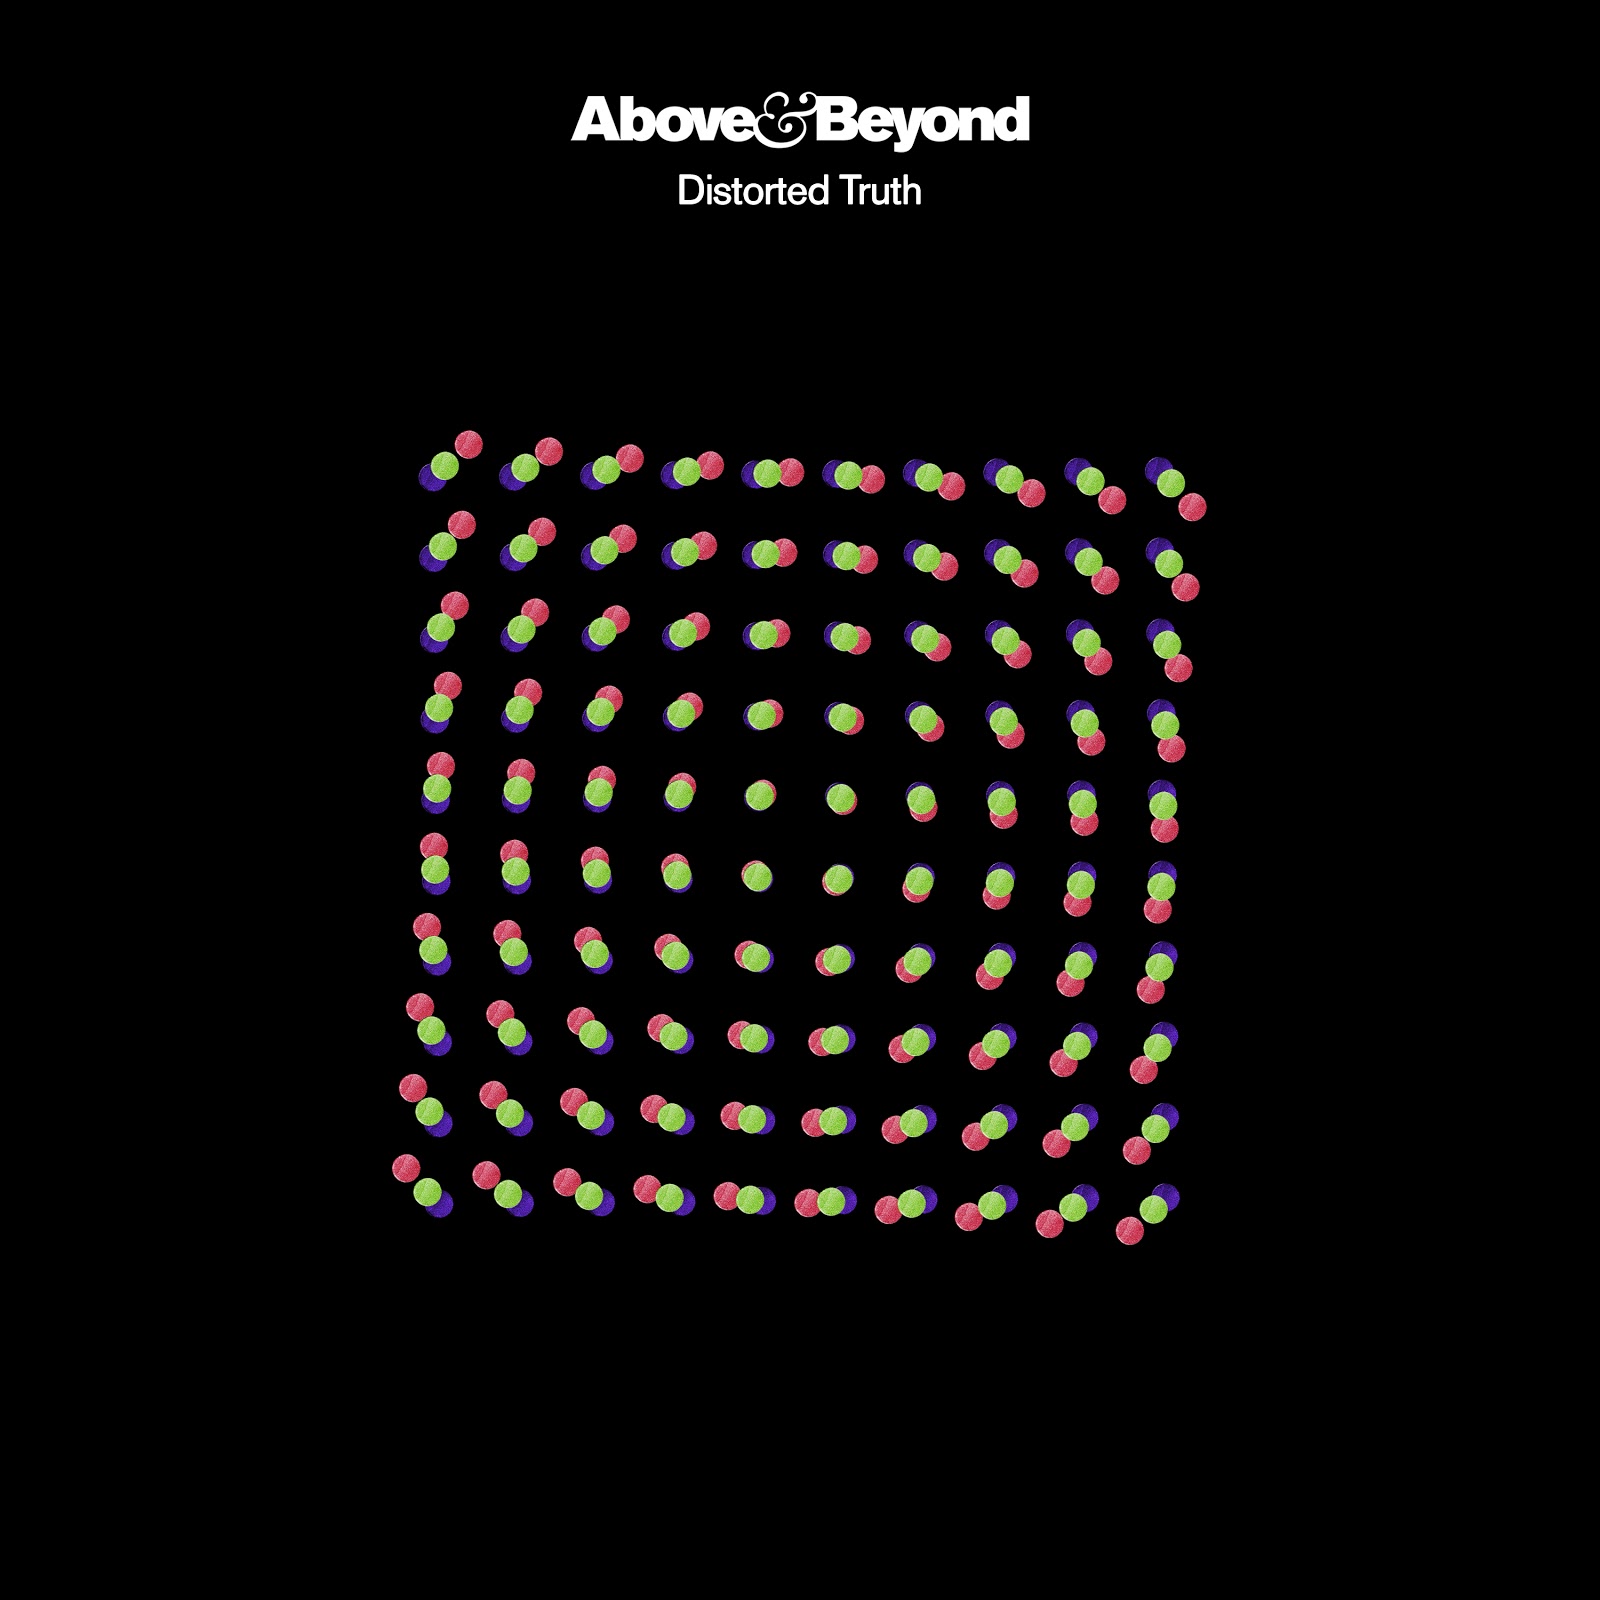 Above and Beyond presents Distorted Truth on Anjunabeats